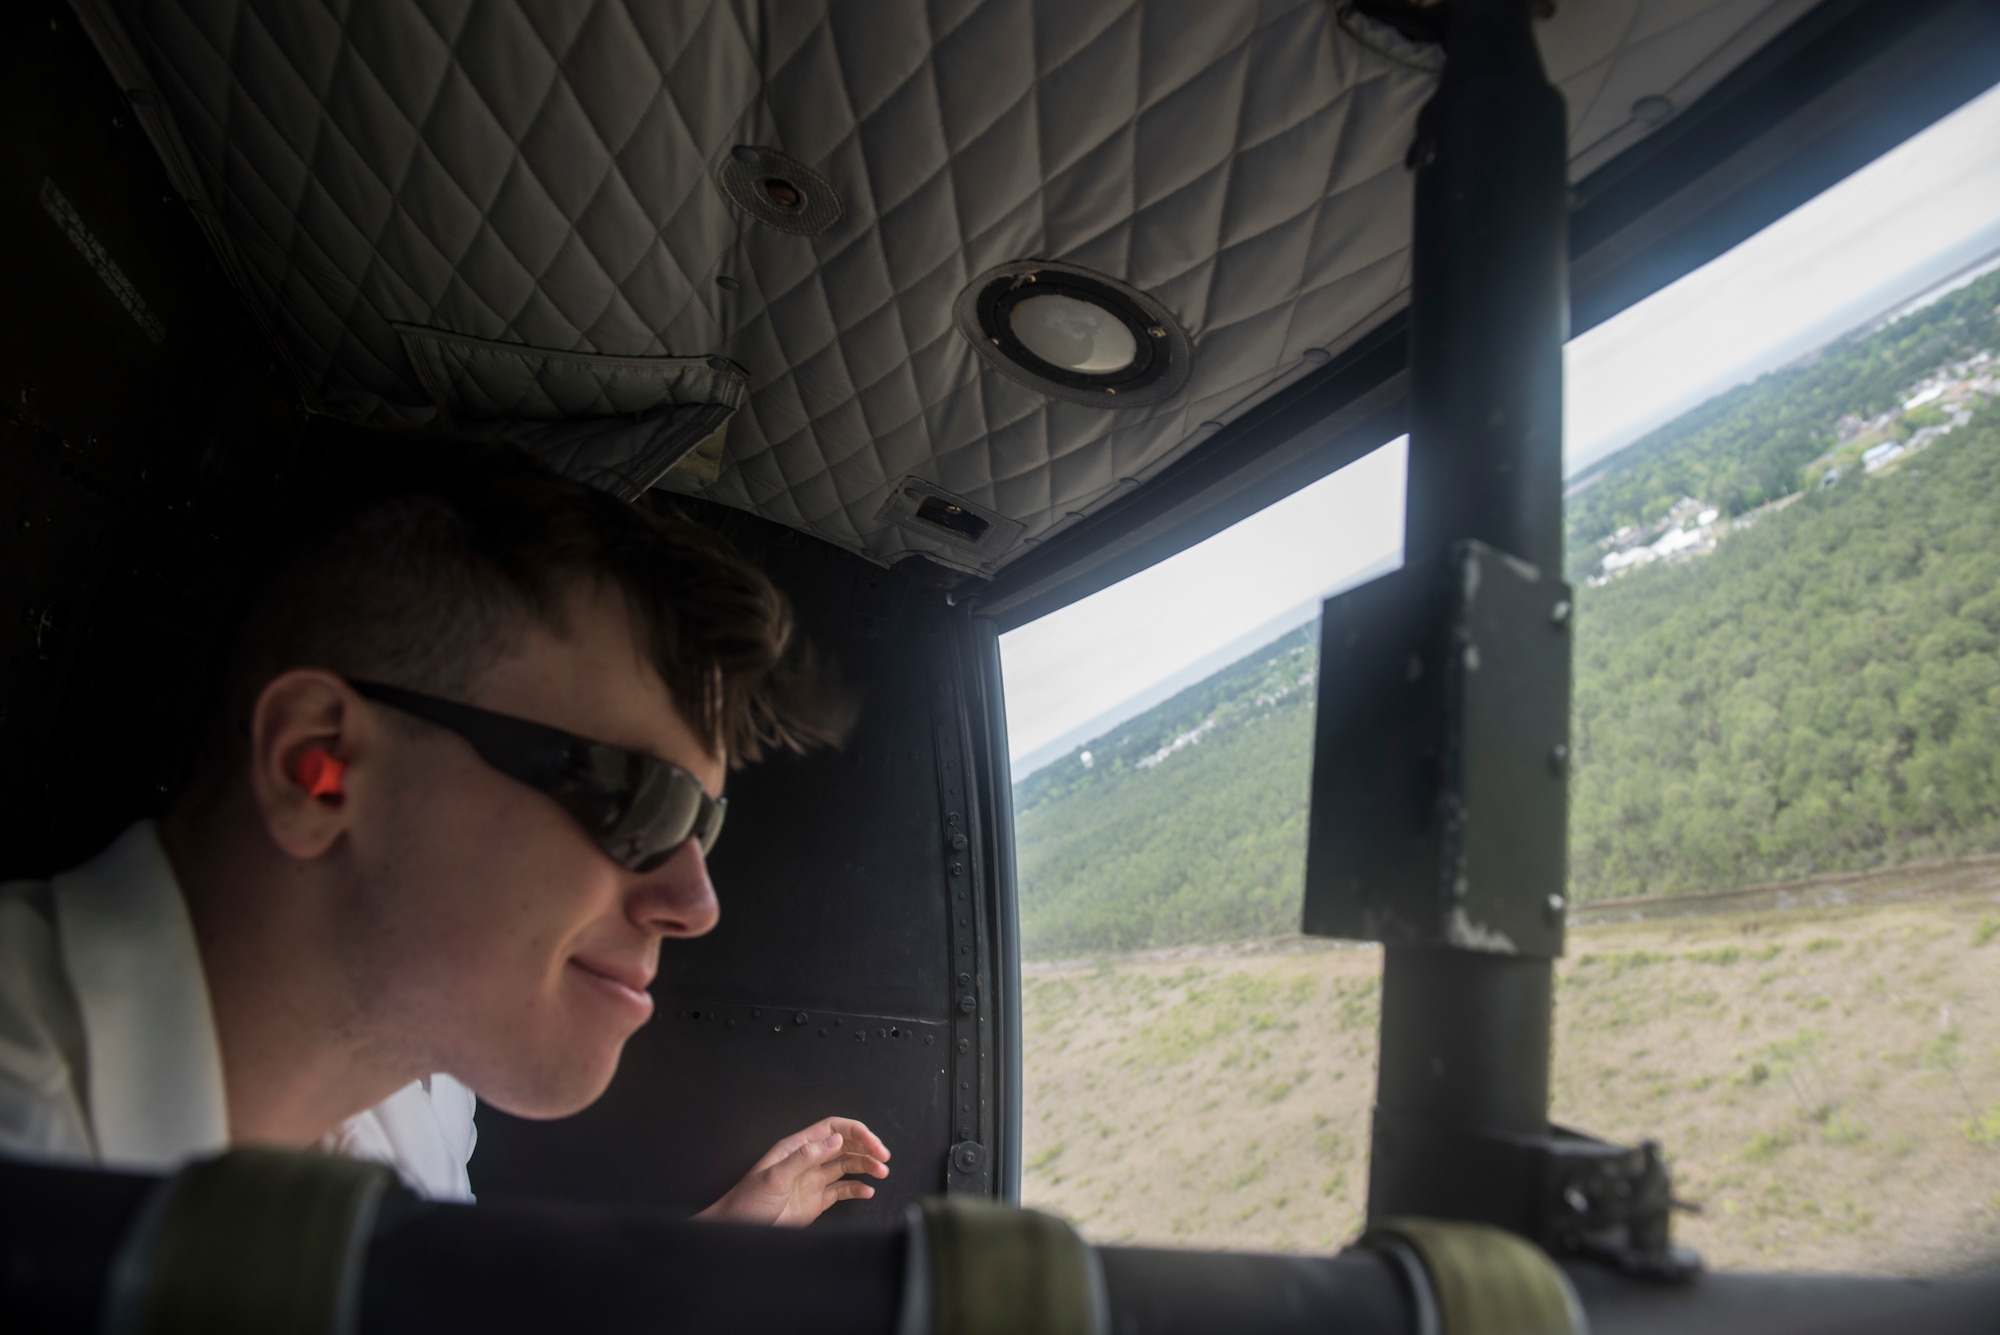 David Stewart, Auburn University Air Force ROTC cadet, looks out the doors of a TH-1H helicopter during an incentive flight during Pathways to Blue April 6, 2018, on Keesler Air Force Base, Mississippi. Throughout the two-day event, ROTC cadets and enlisted personnel traveled through this diverse and inclusive event to better aim themselves to become future Air Force leaders. The event provided more than 280 cadets from 15 different colleges and universities a chance to receive hands-on demonstrations of various career fields. (U.S. Air Force photo by Senior Airman Travis Beihl)